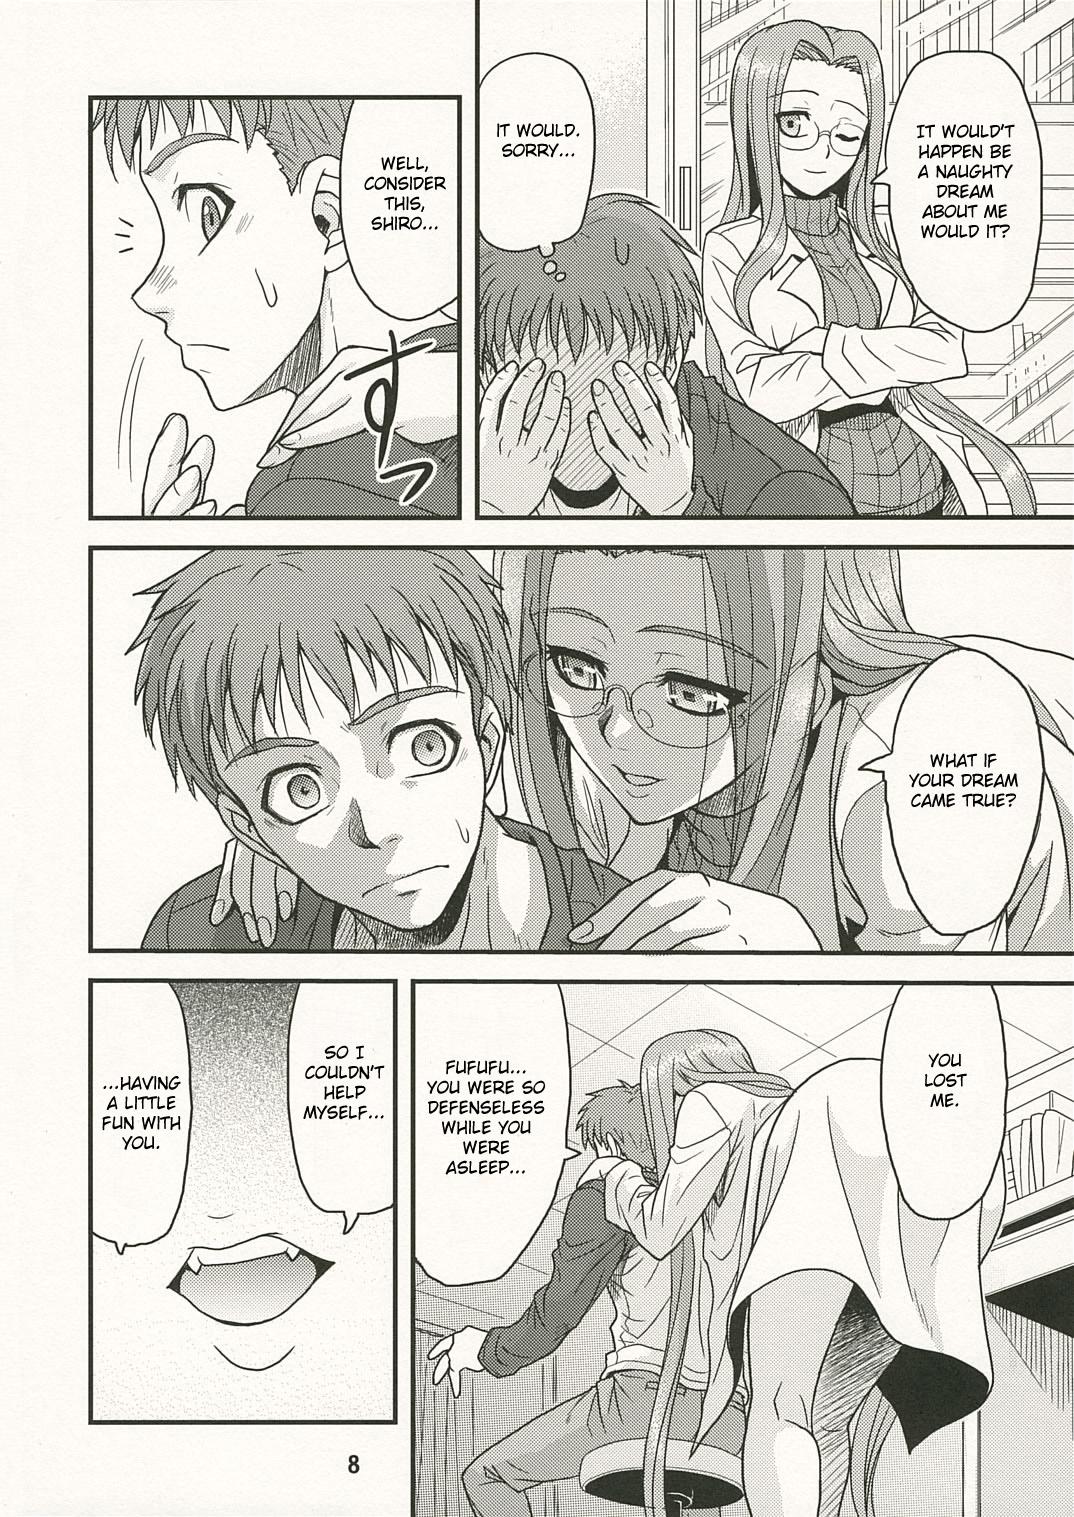 Food Ride on Dream - Fate hollow ataraxia Adorable - Page 7